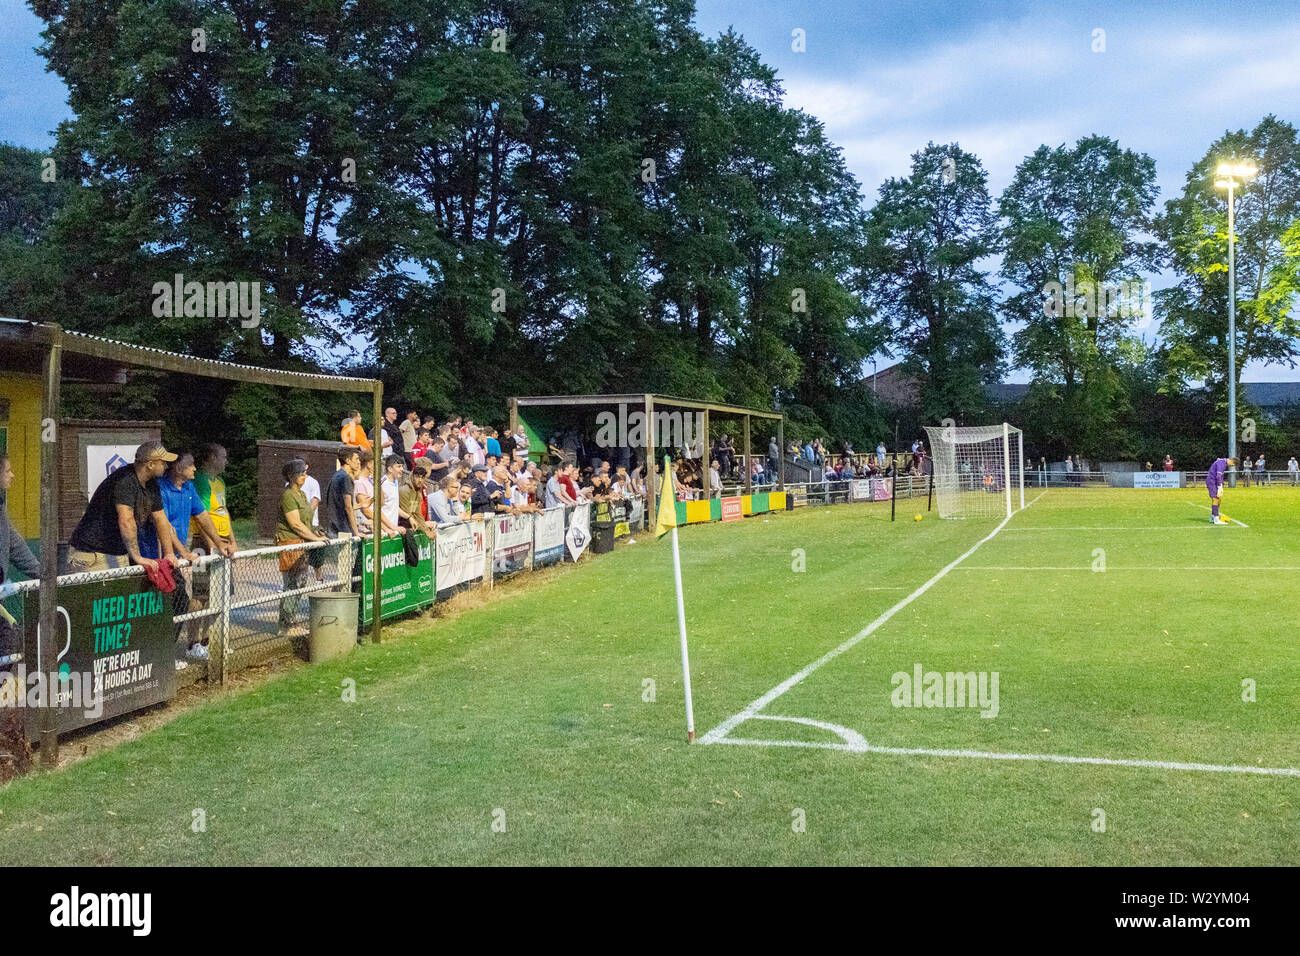 Fans and spectators standing behind goal on terrace at English lower league football ground Stock Photo